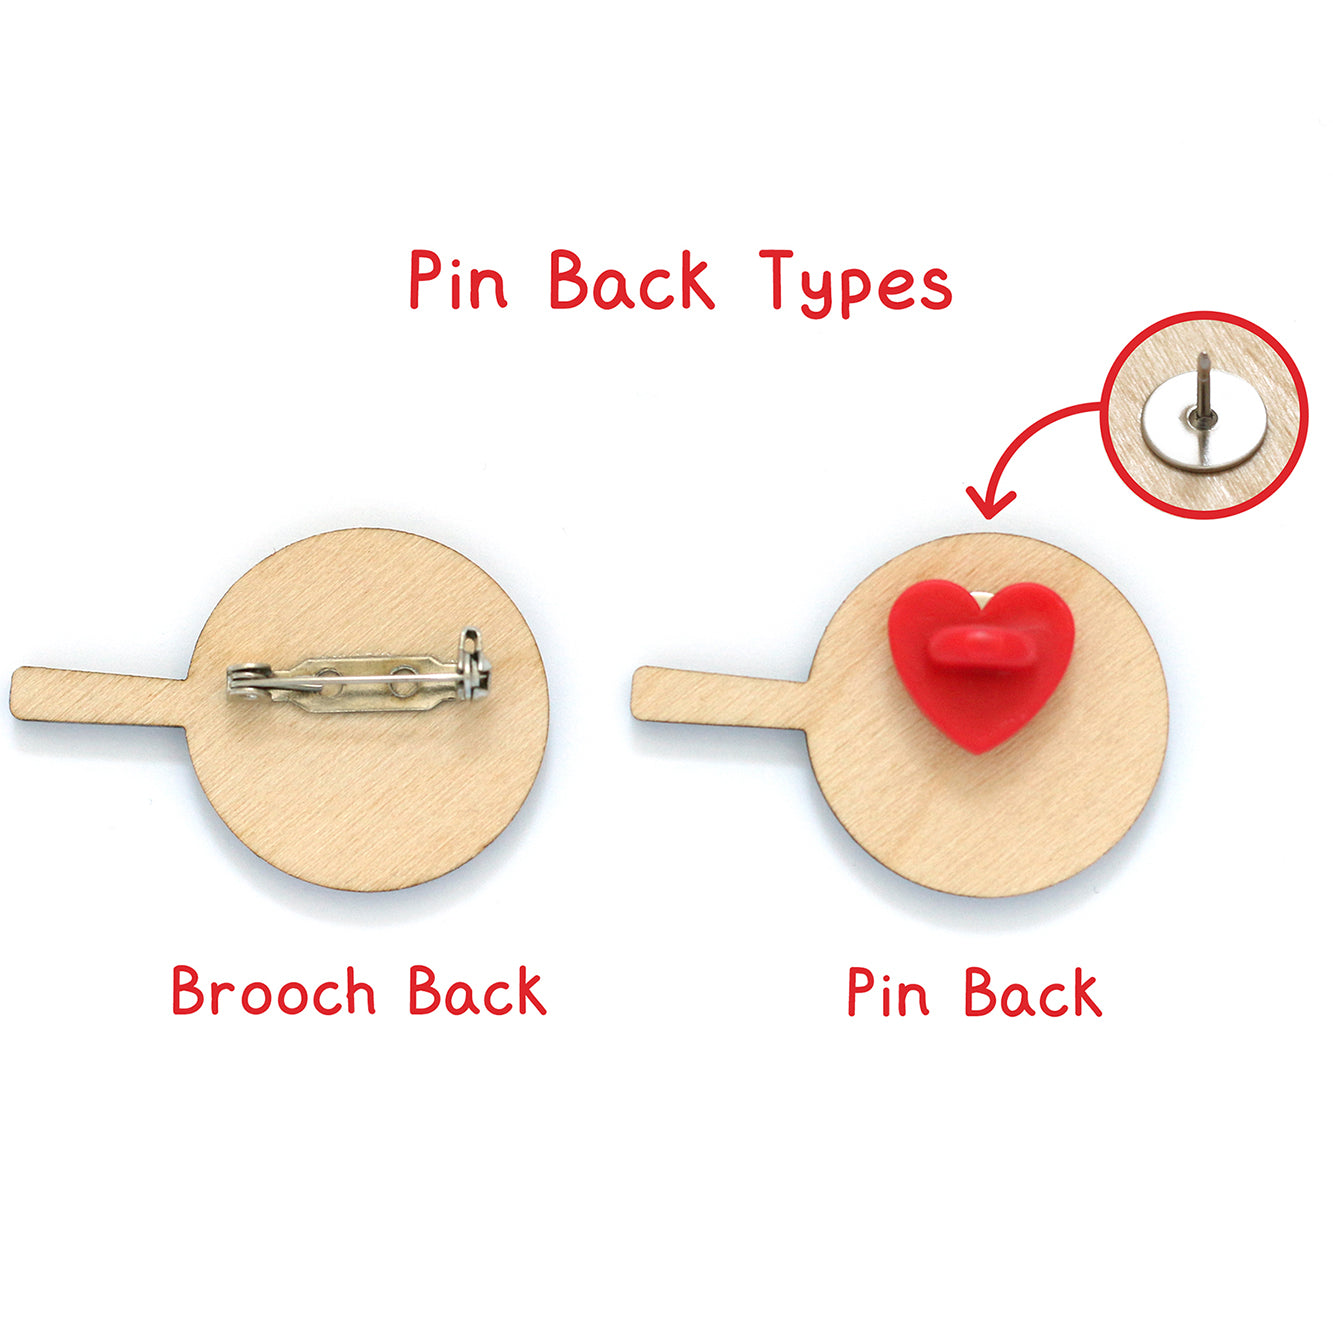 Pin back Types for Frying Egg Pan Brooch